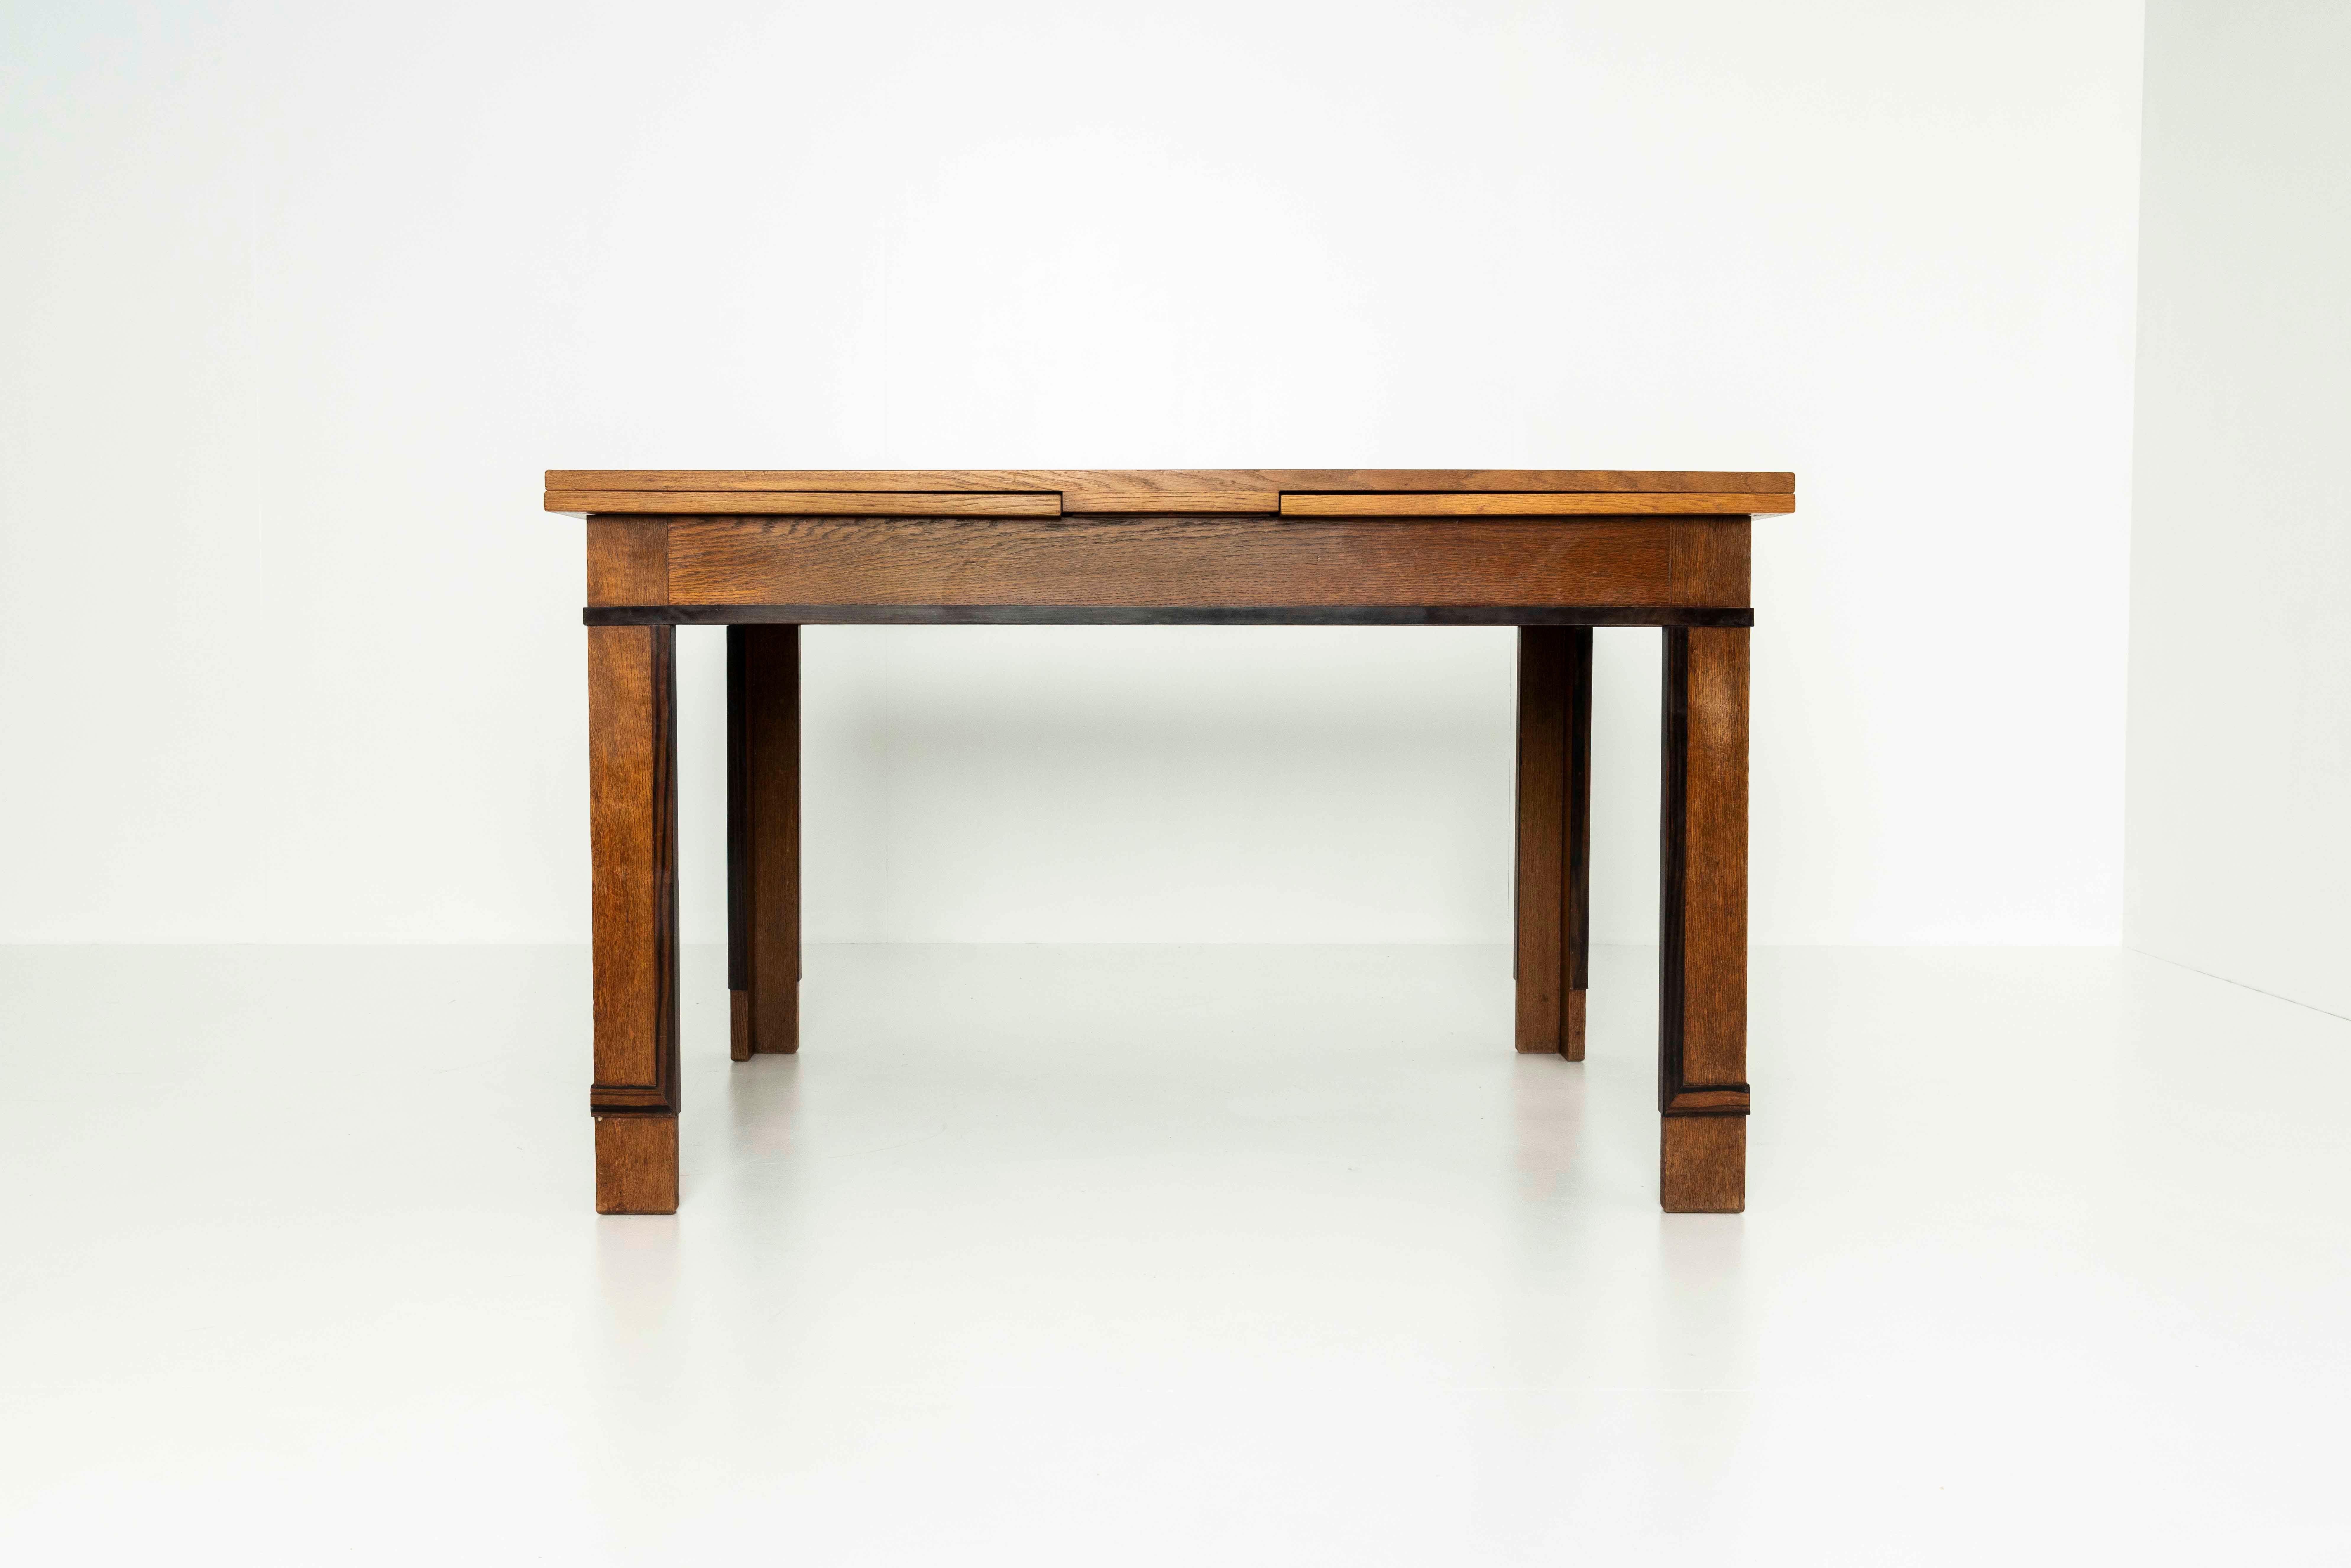 Amsterdam School Dining Room Set by P.E.L. Izeren for Genneper Molen, The Nether 6